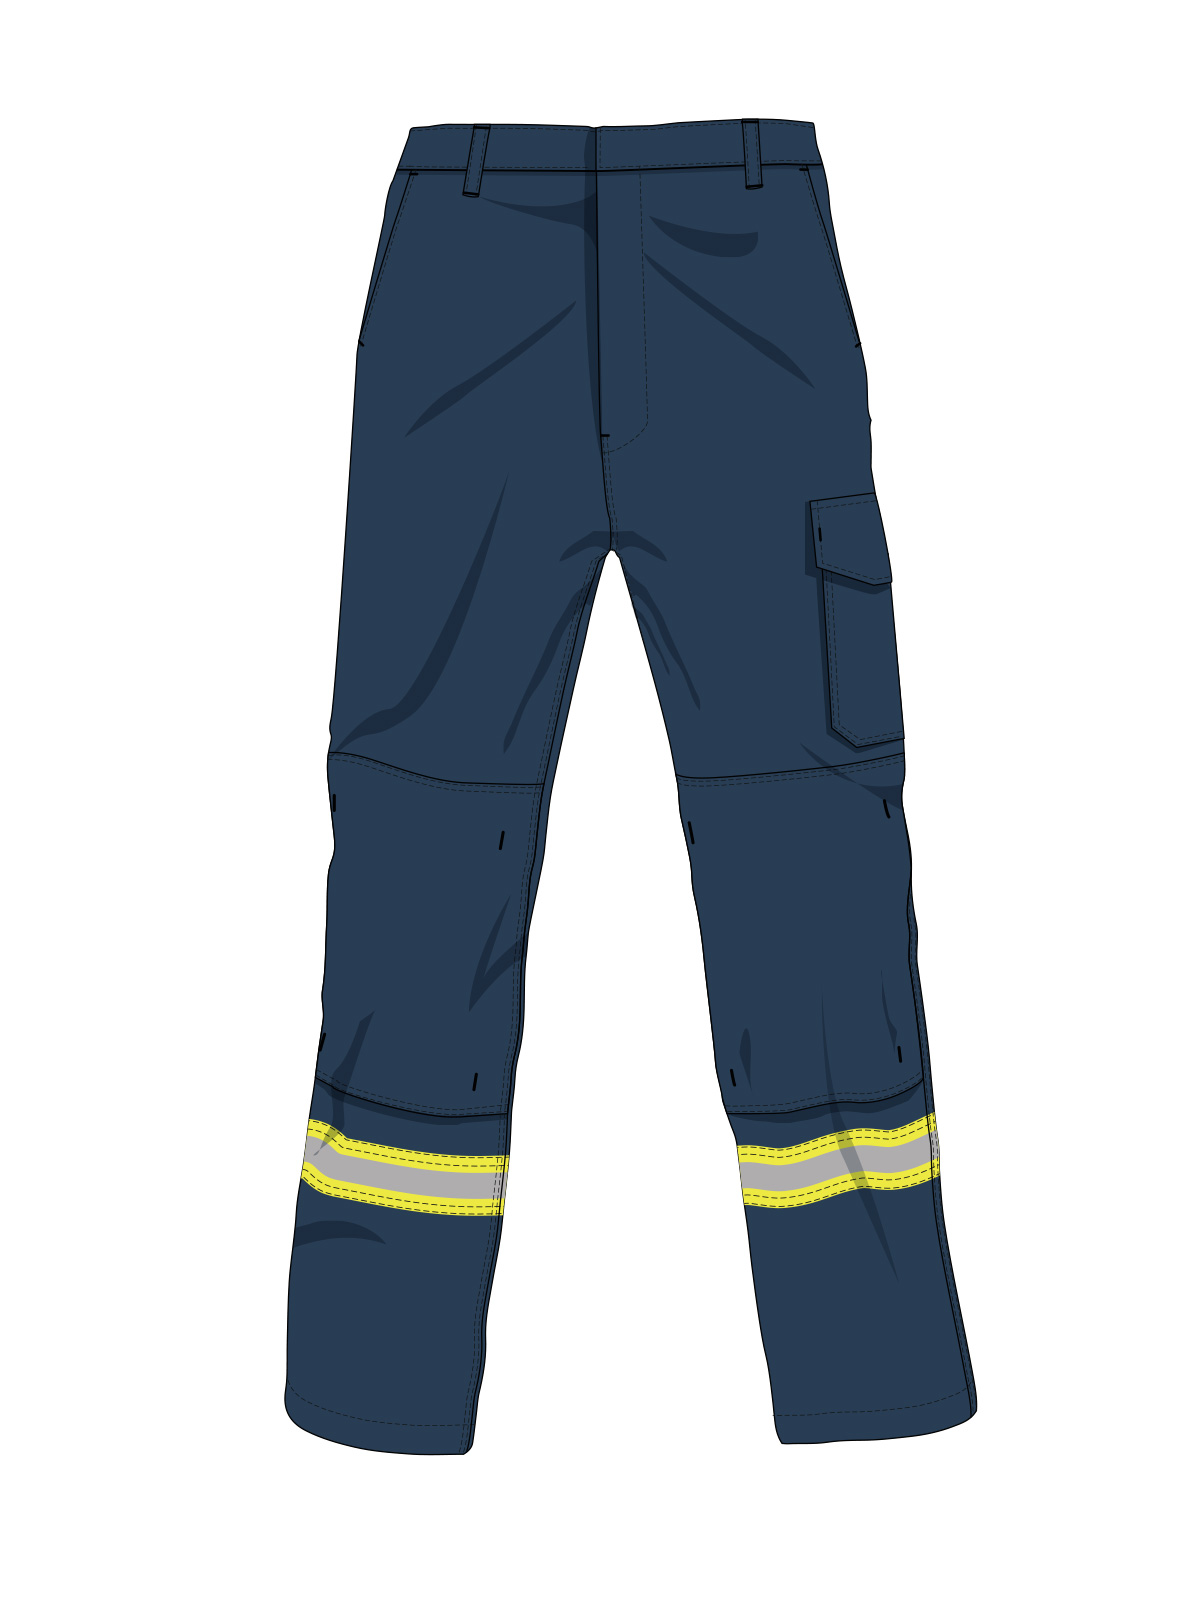 Secura Flame Resistant Trousers